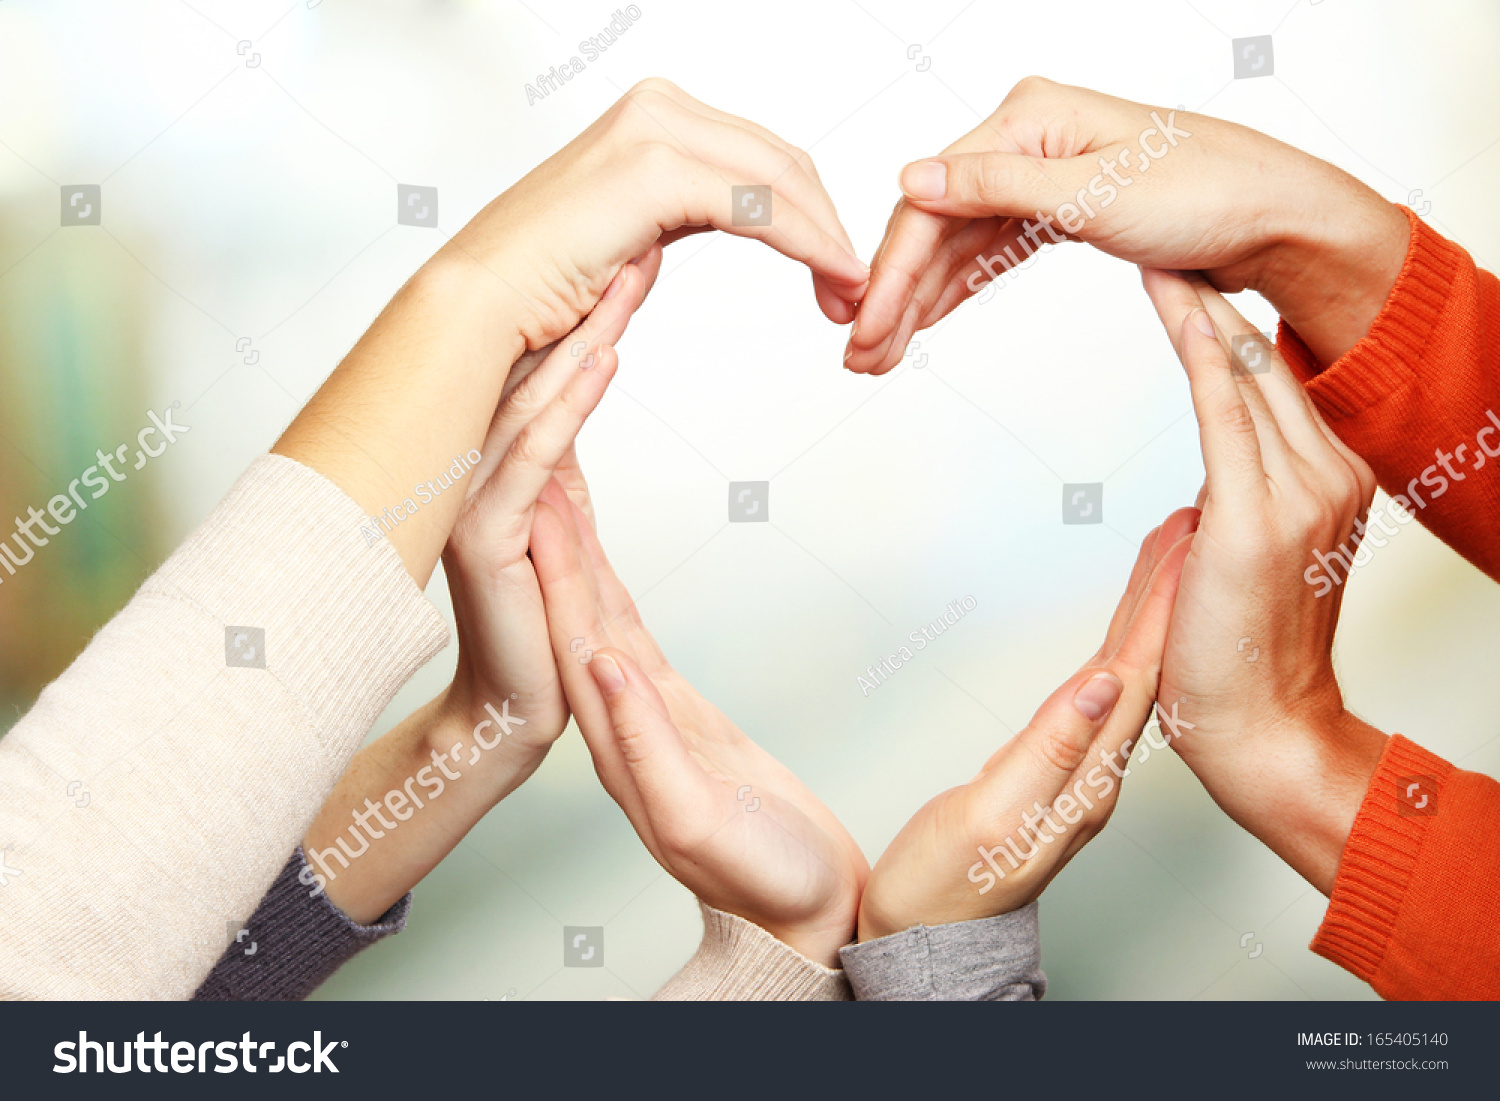 Human hands in heart shape on bright background #165405140